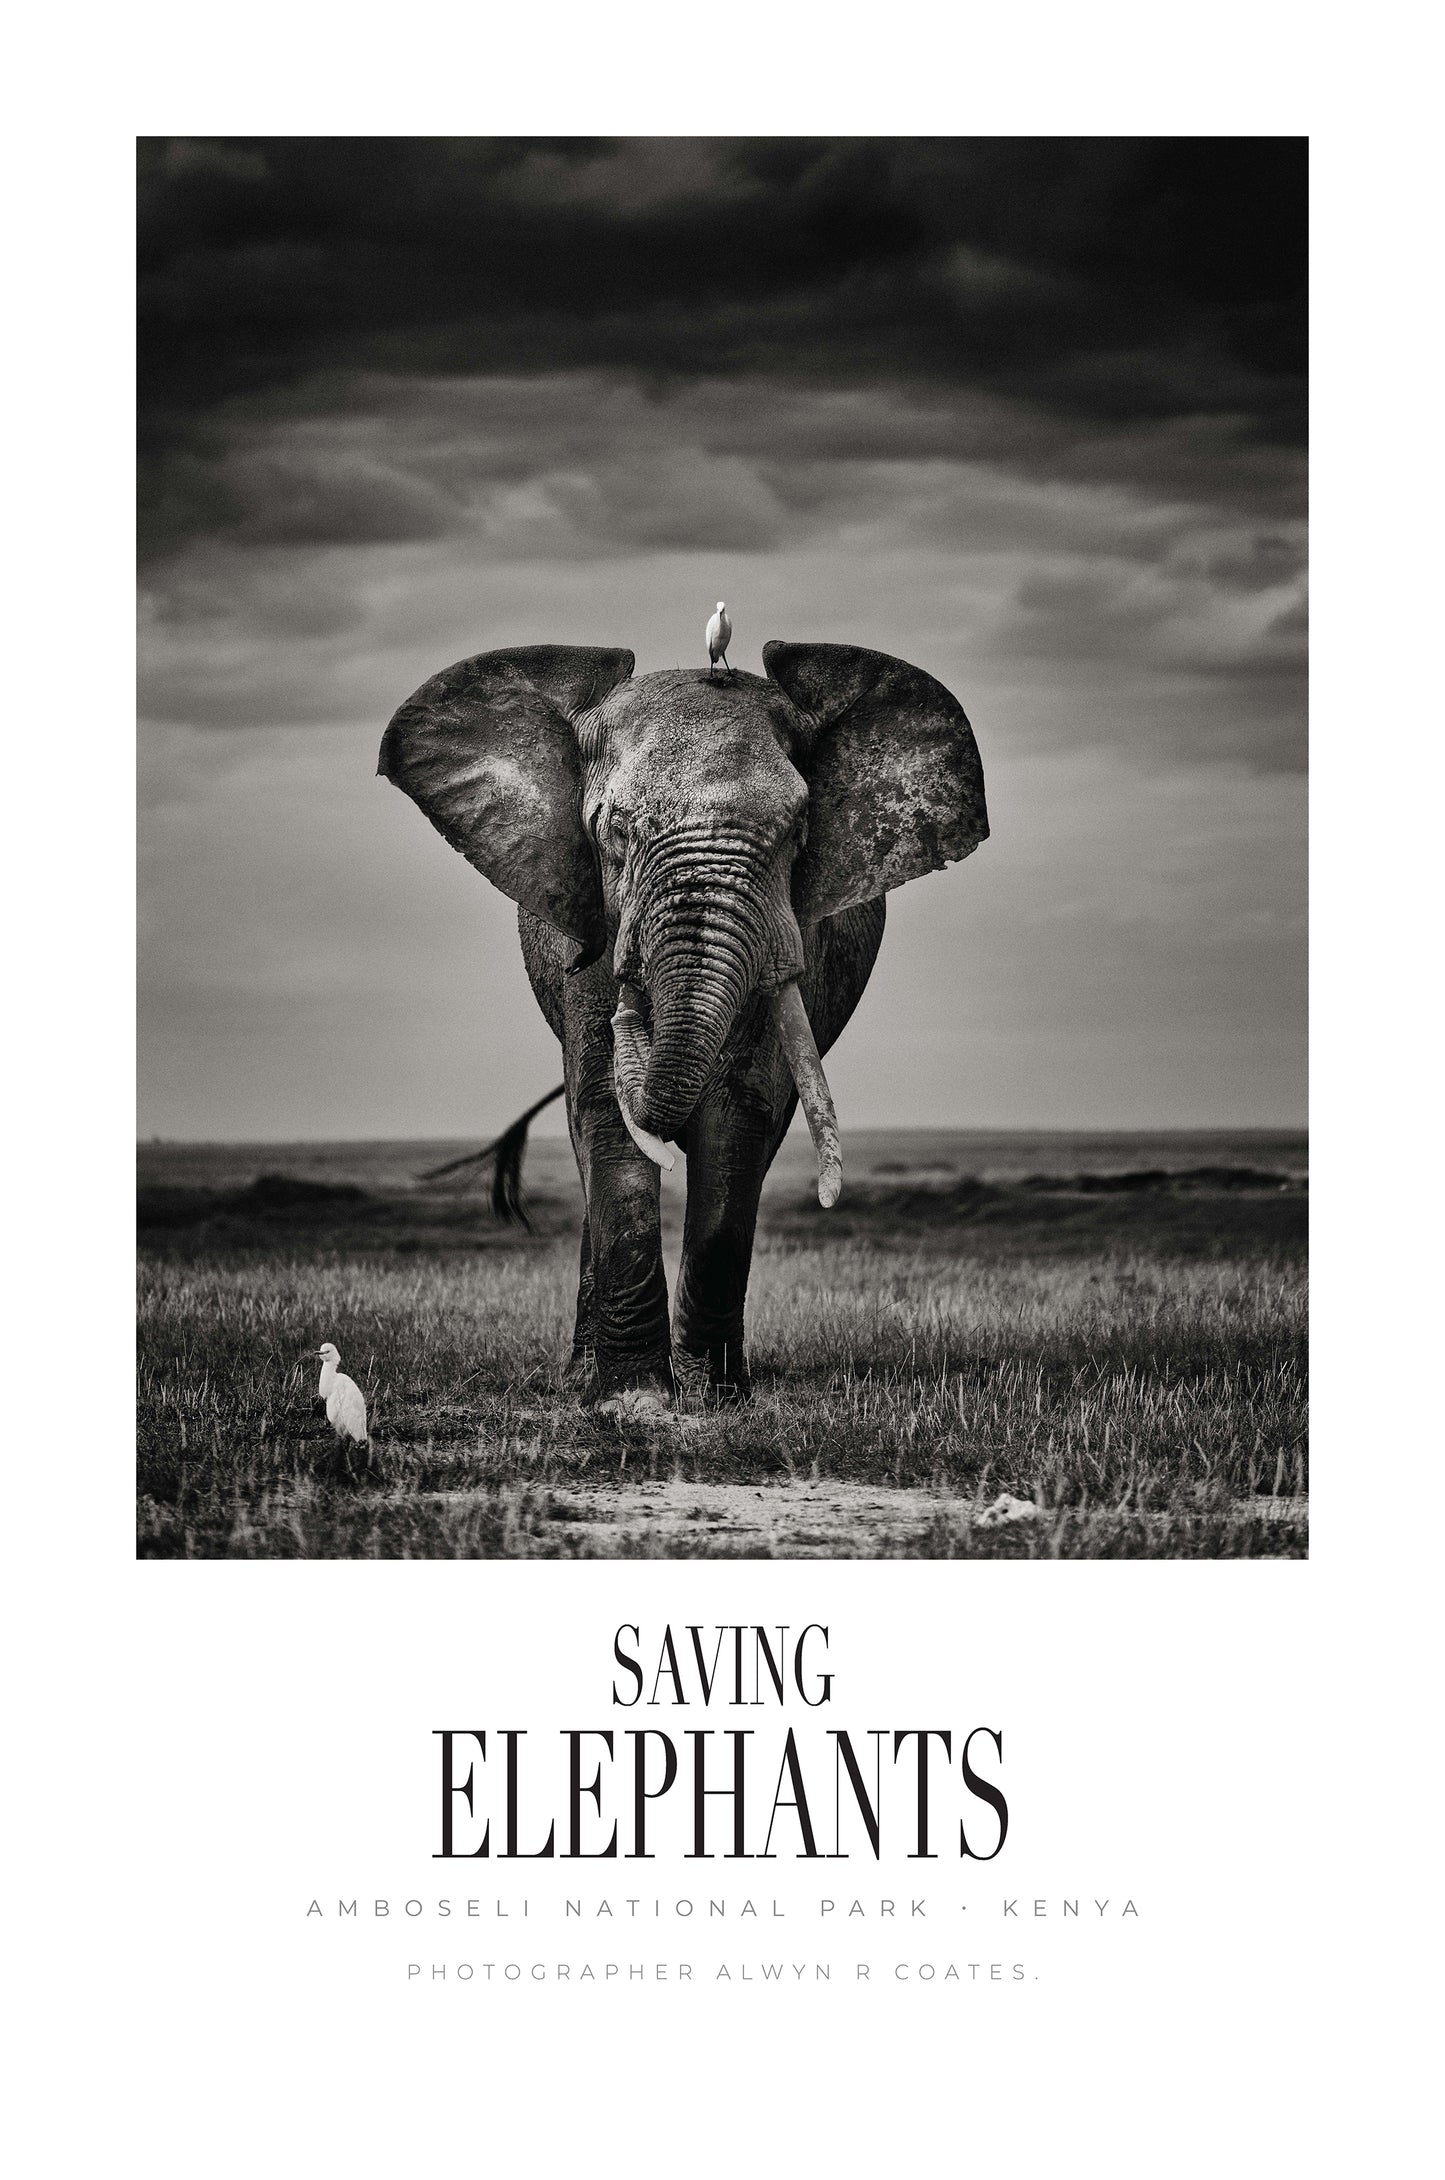 Beautiful Limited Edition Lithograph. From the Saving Elephants Book